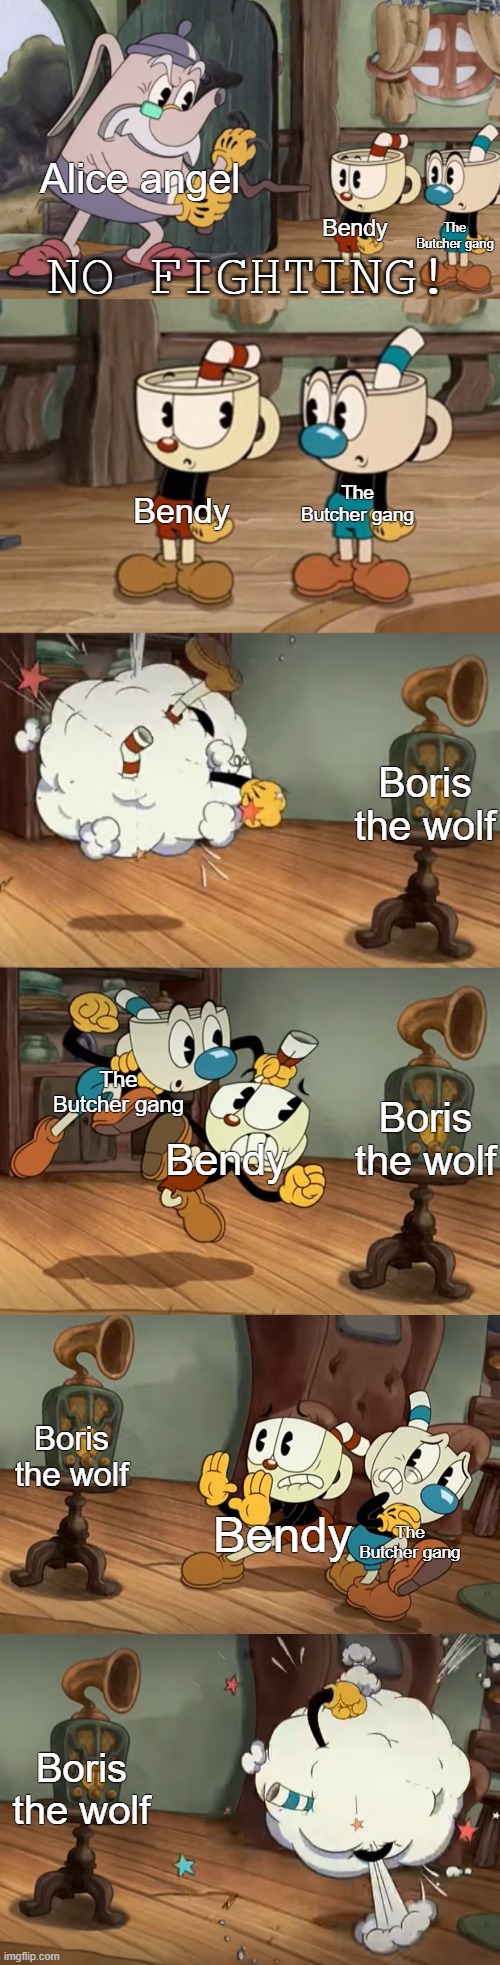 Bendy Vs. The Butcher gang | Alice angel; Bendy; The Butcher gang; The Butcher gang; Bendy; Boris the wolf; Boris the wolf; The Butcher gang; Bendy; Boris the wolf; The Butcher gang; Bendy; Boris the wolf | image tagged in cuphead show no fighting | made w/ Imgflip meme maker